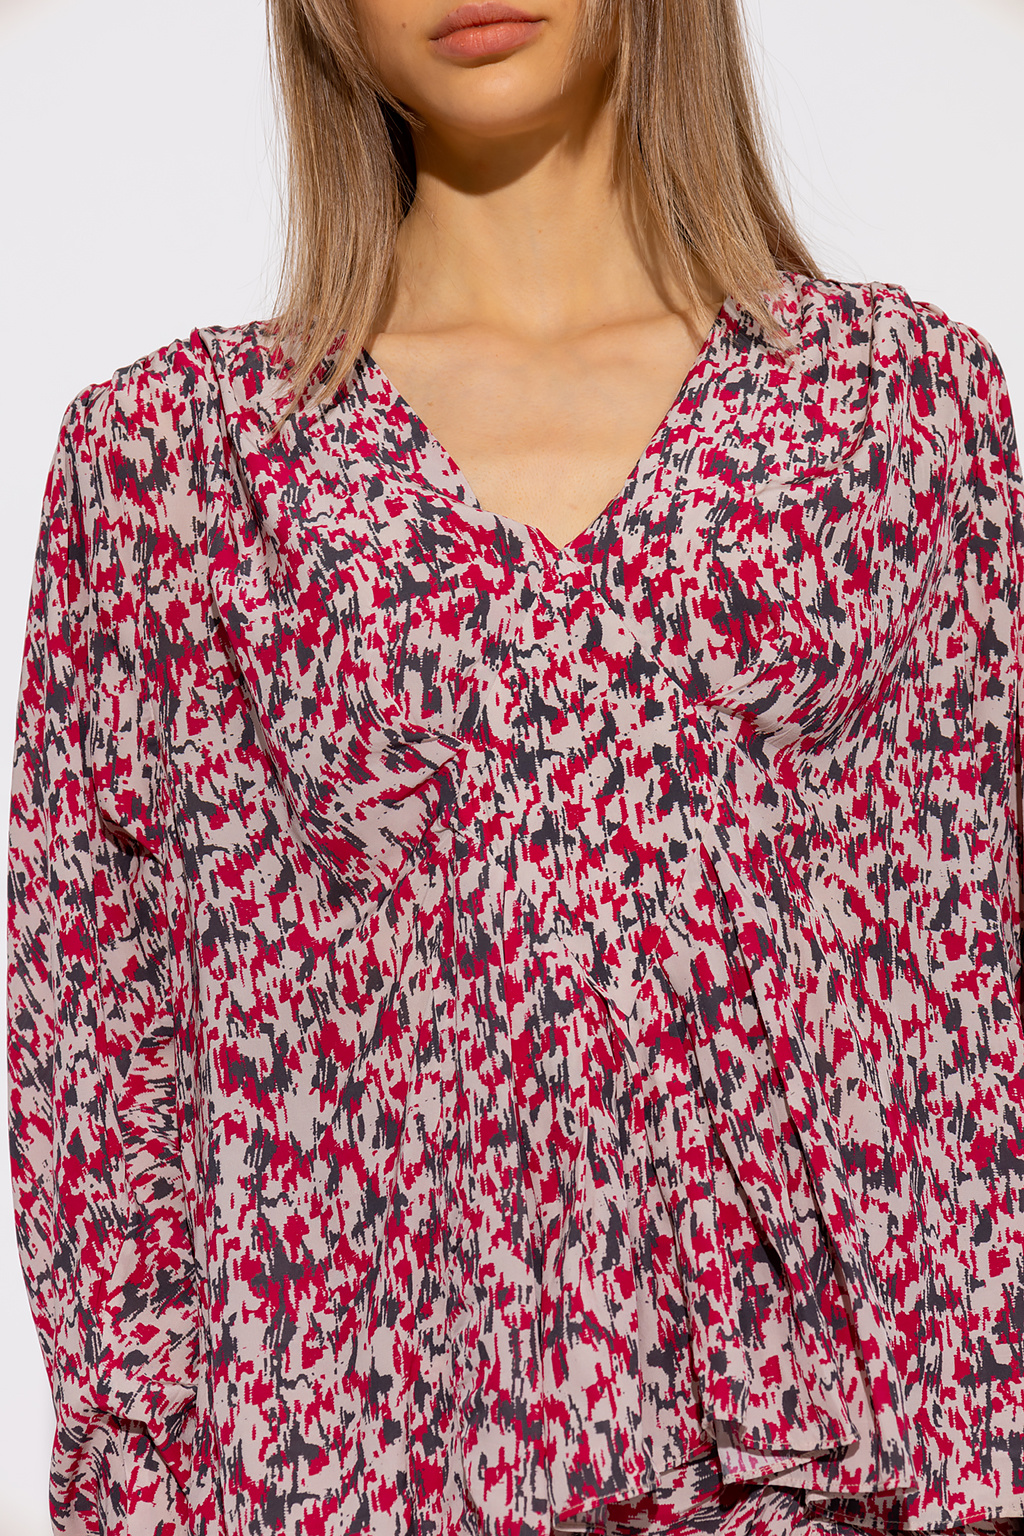 Add to bag ‘Amirya’ patterned top